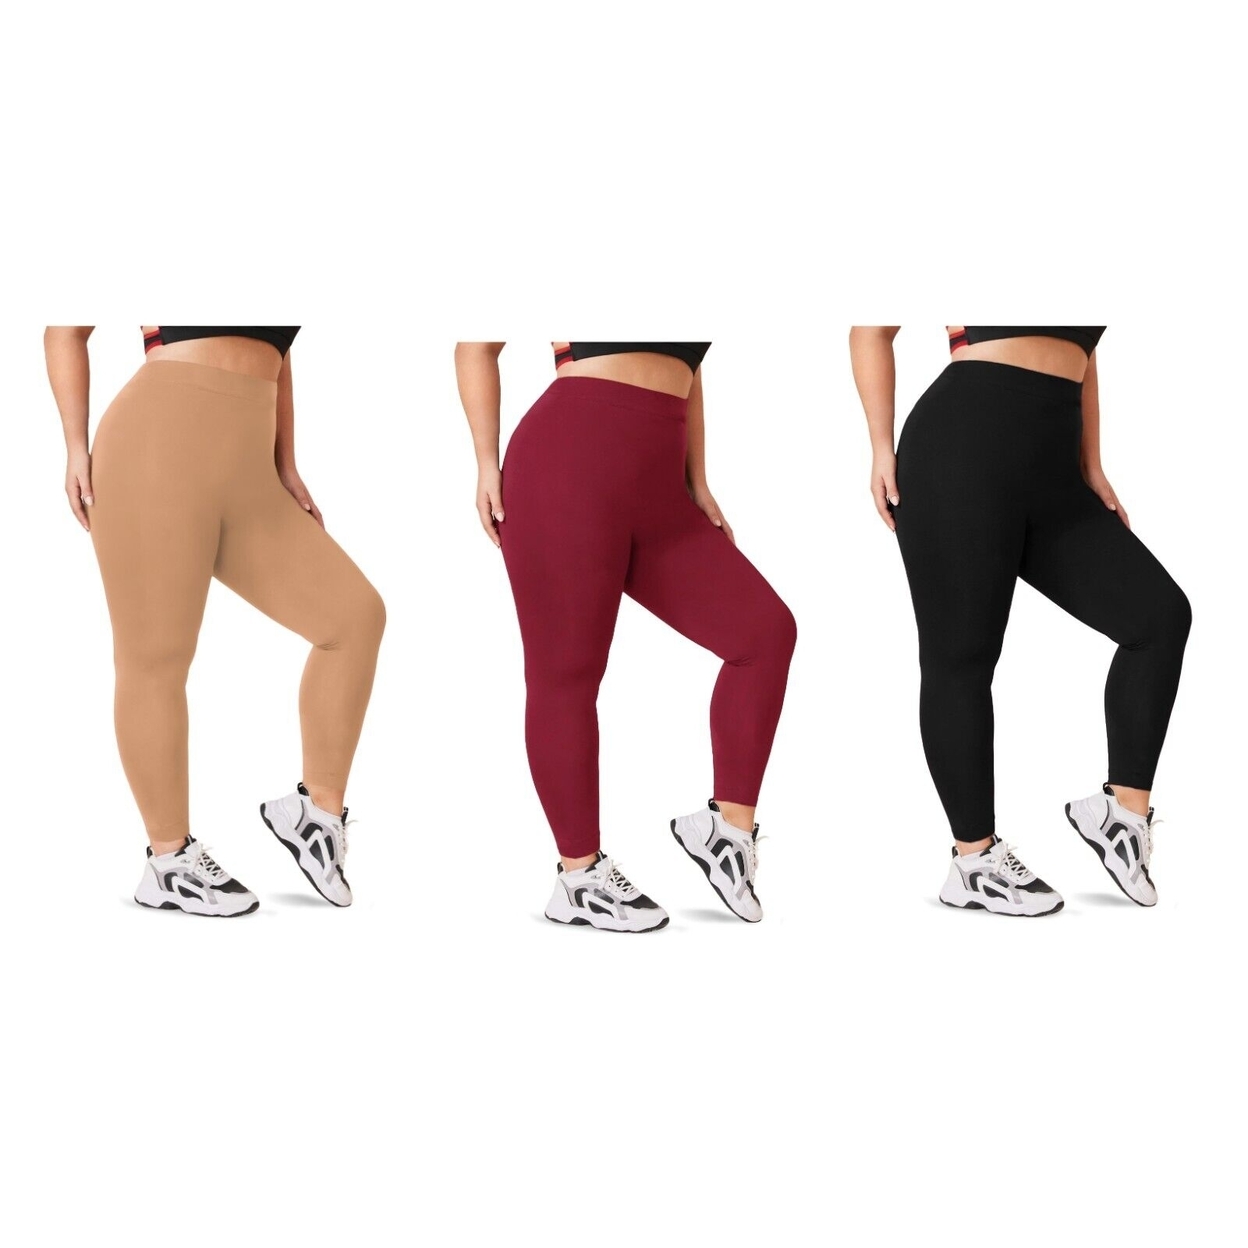 2-Pack: Women's Casual Ultra-Soft Smooth High Waisted Athletic Active Yoga Leggings Plus Size Available - Beige & Beige, 2x